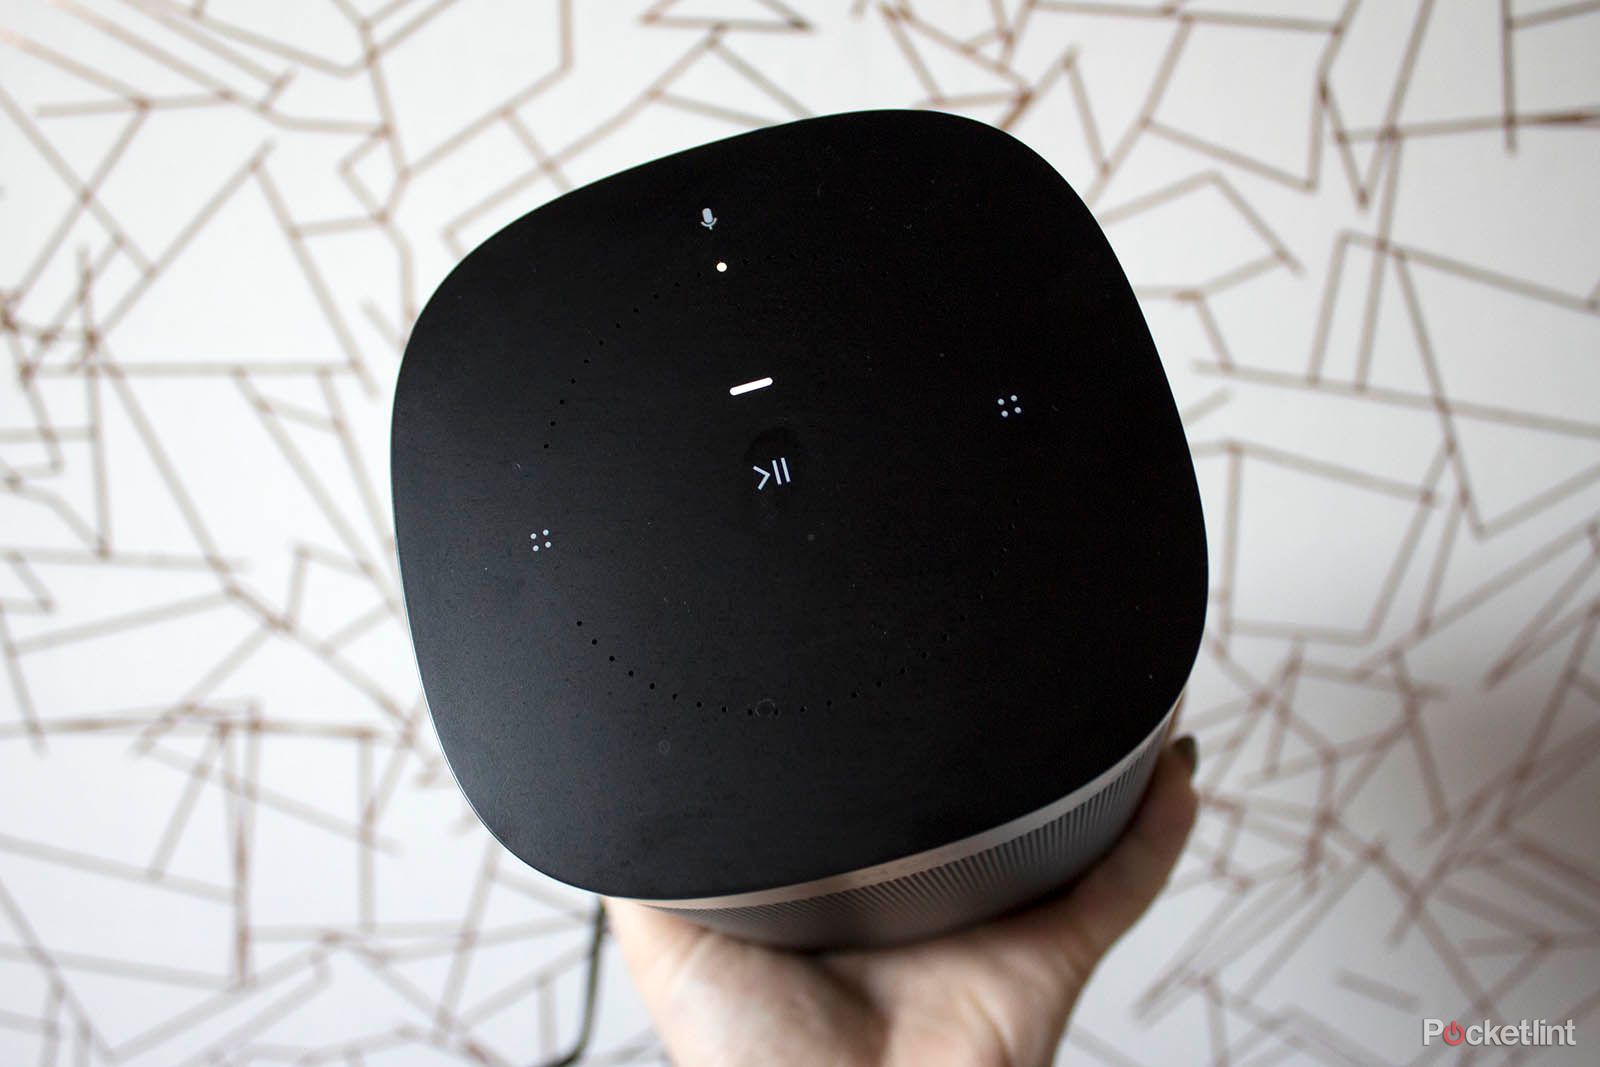 Sonos S18 satellite speaker leaked to add smarts to Playbar image 1